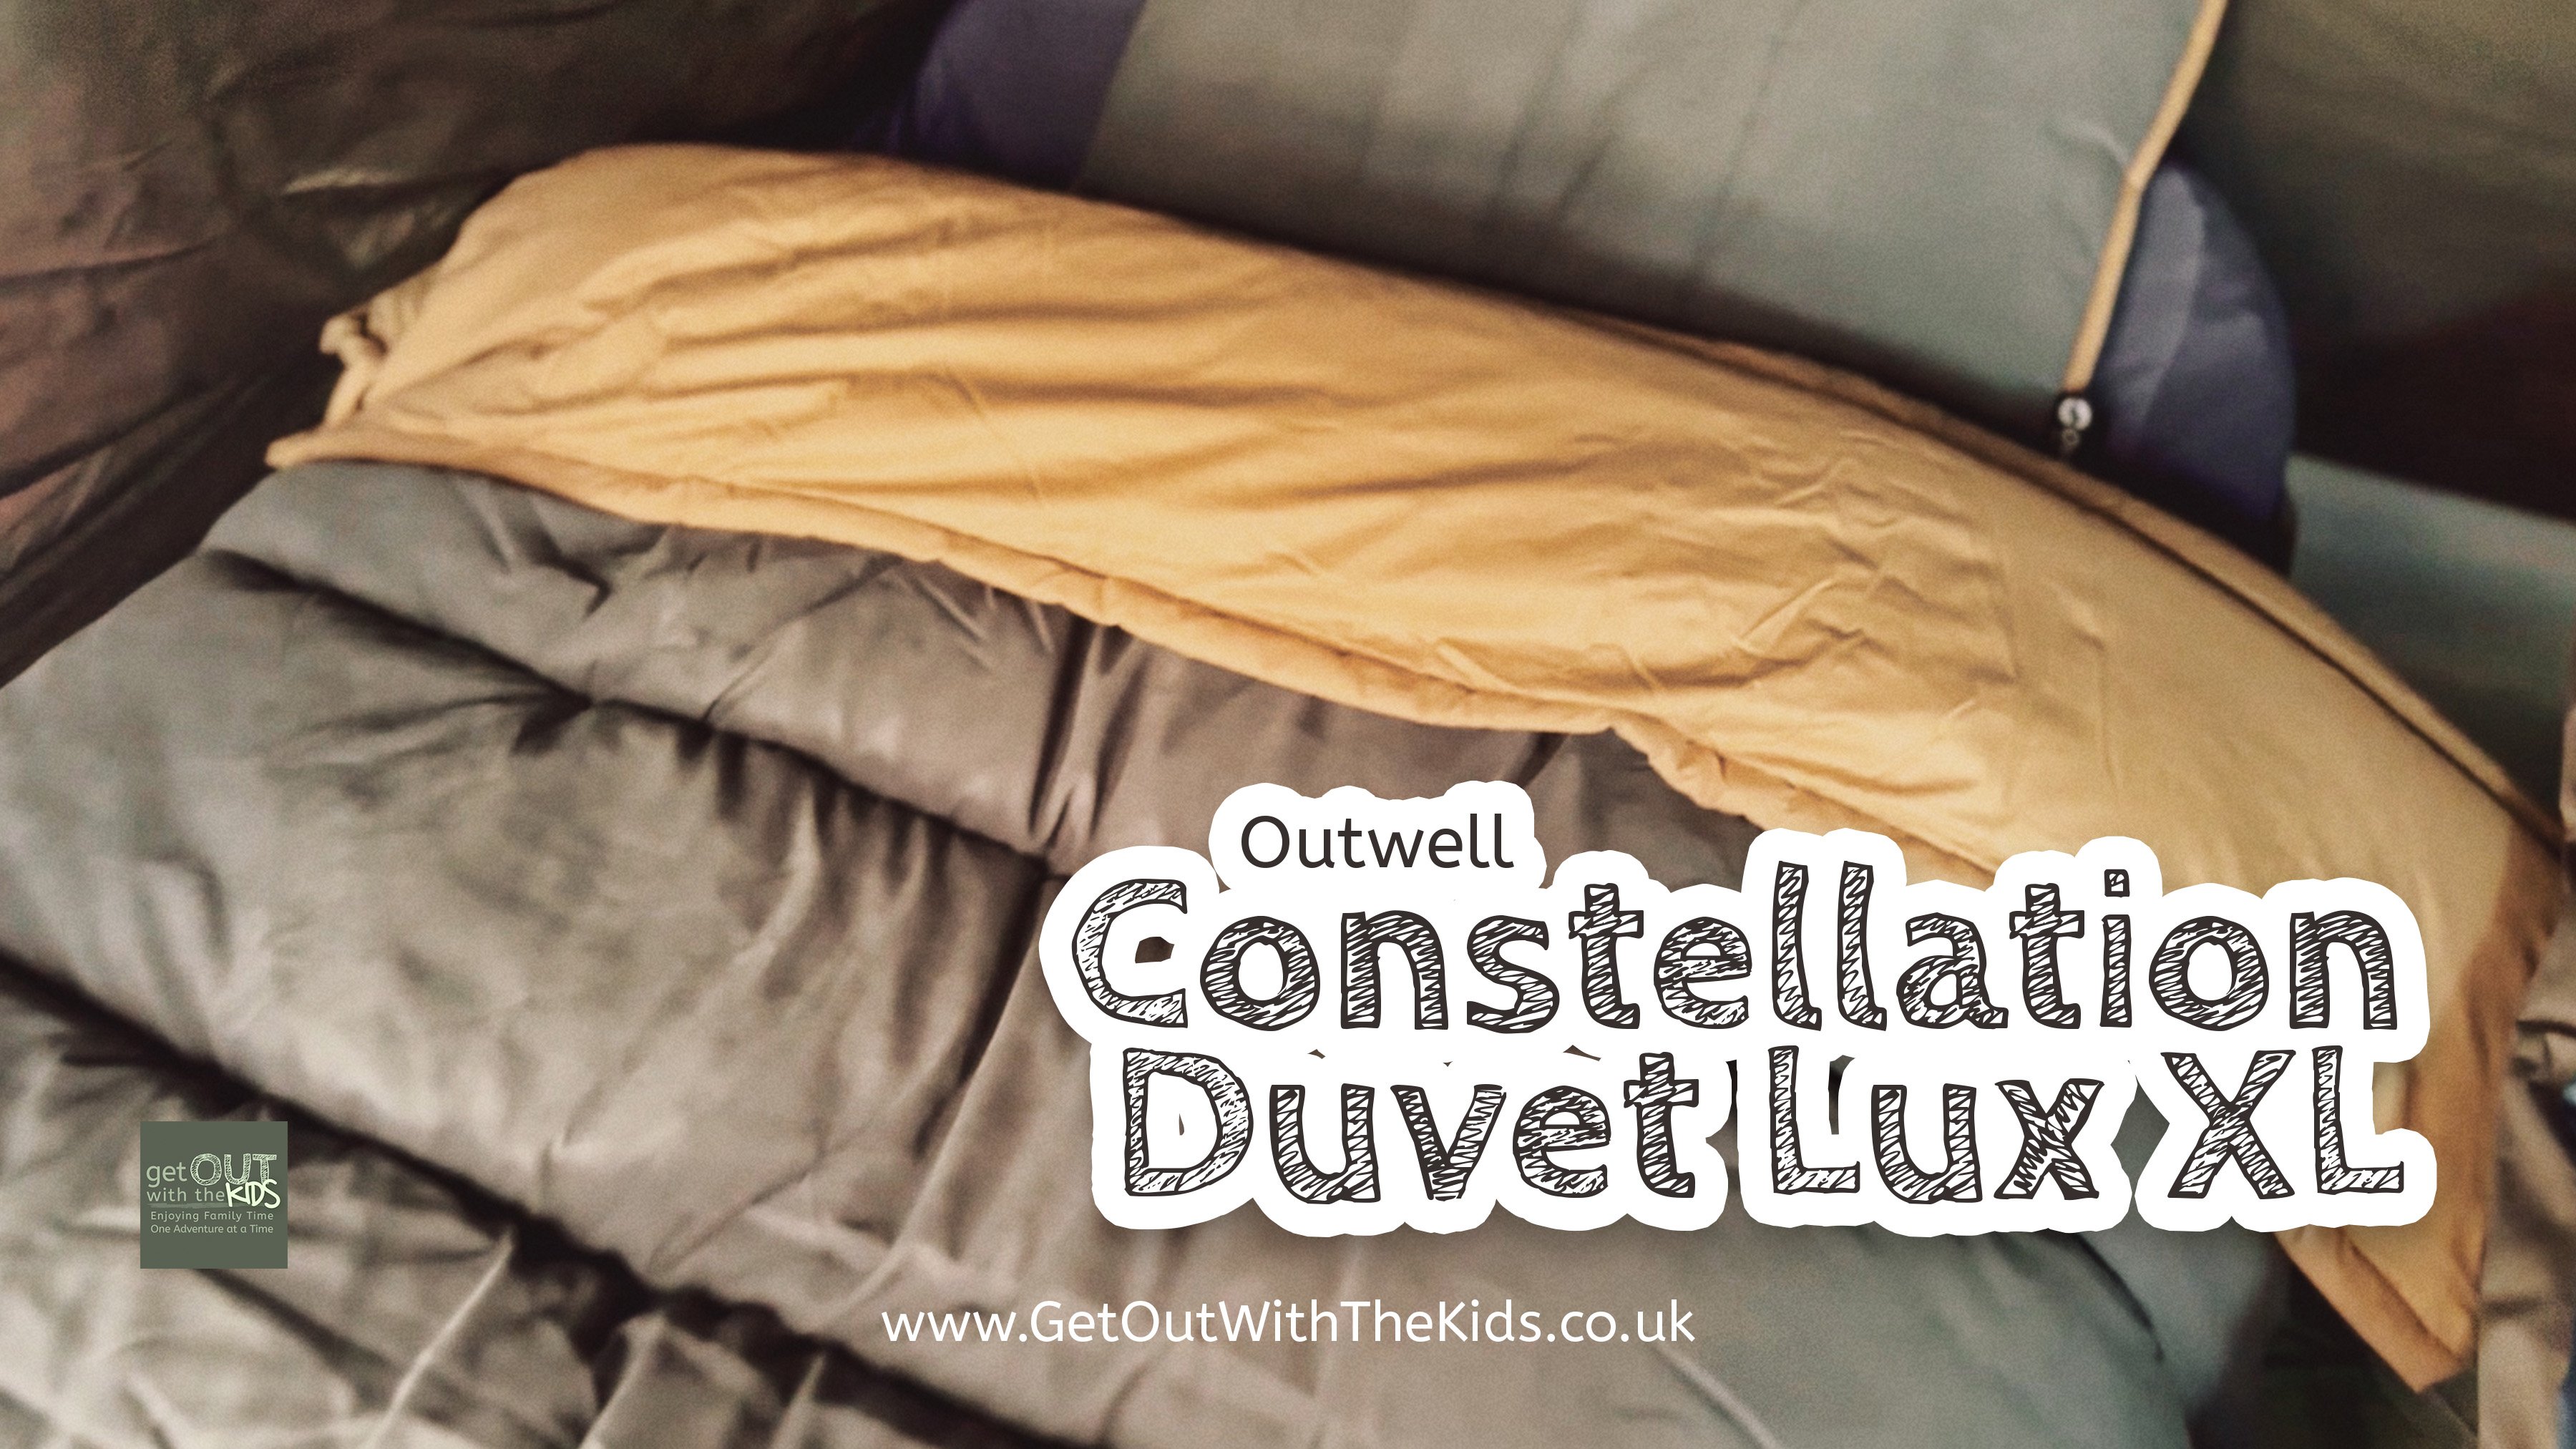 Photo of the Constellation Duvet Lux XL made up on a camp bed along with pillow